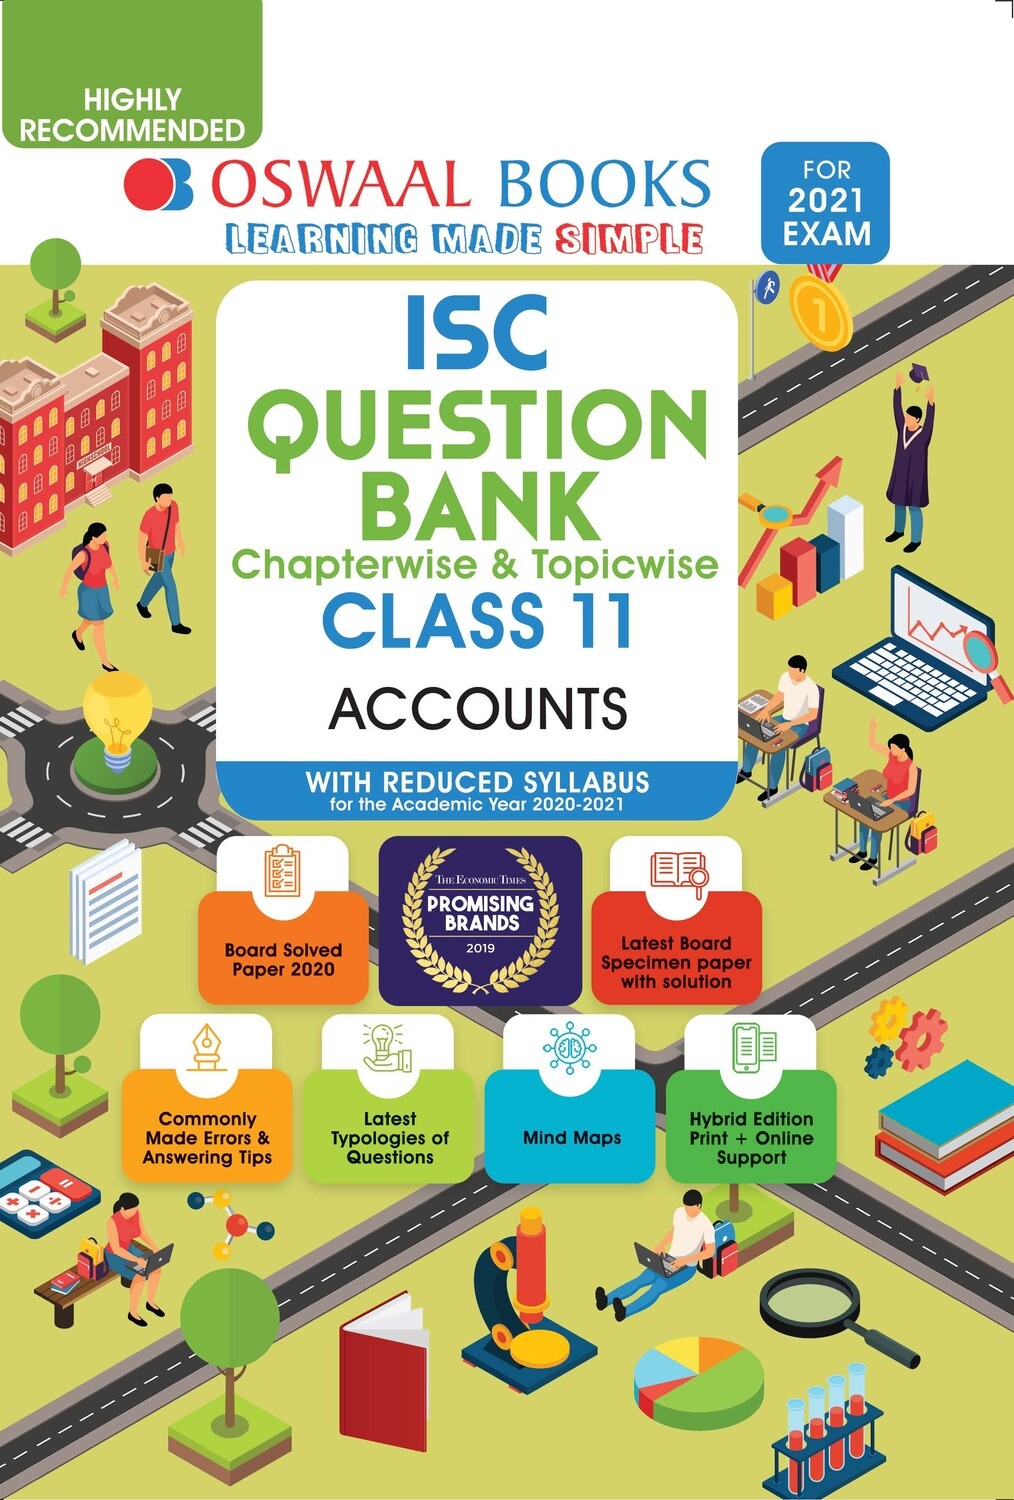 Buy e-book: Oswaal ISC Question Banks Class 11 Accounts (Reduced Syllabus) (For 2021 Exam)